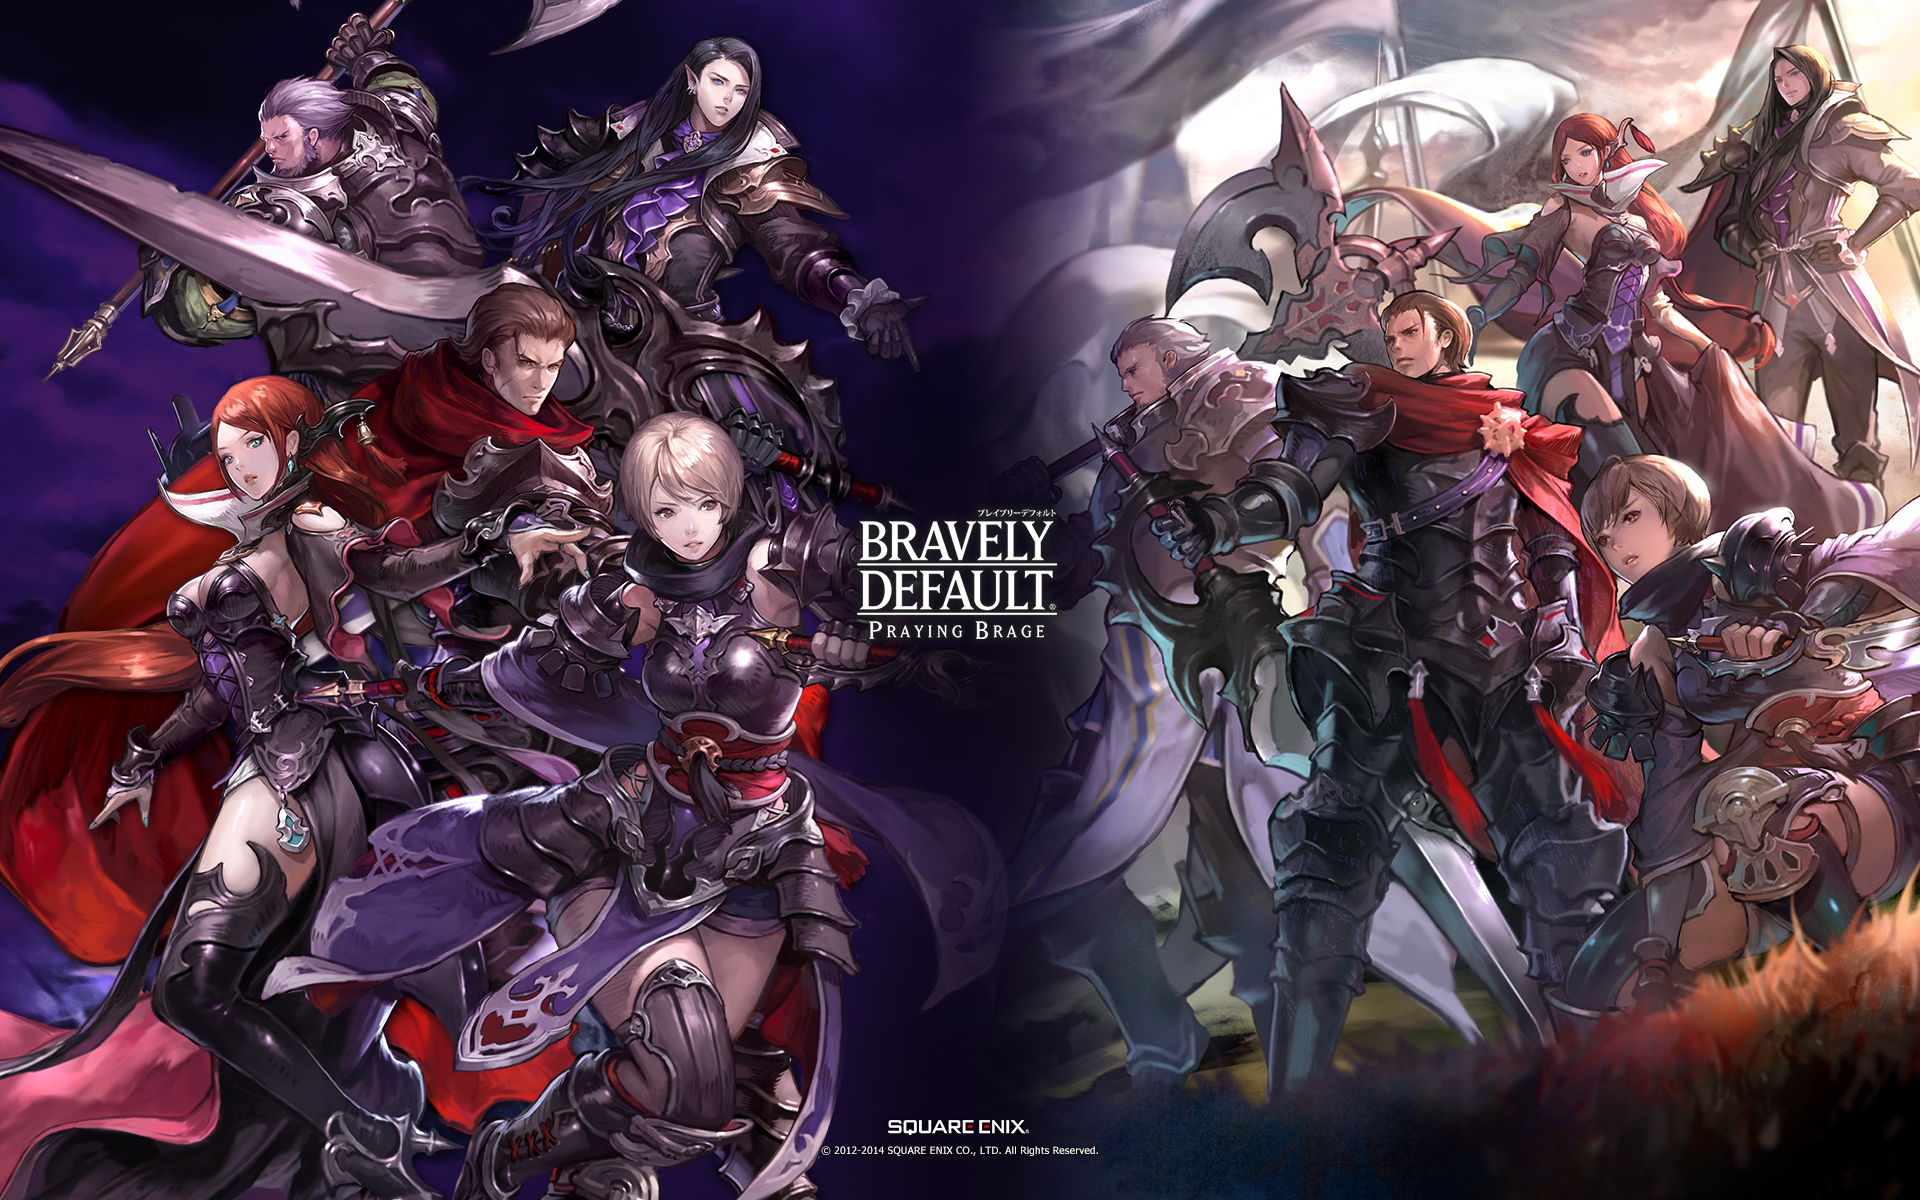 bravely second wallpaper,action adventure game,pc game,games,cg artwork,fictional character